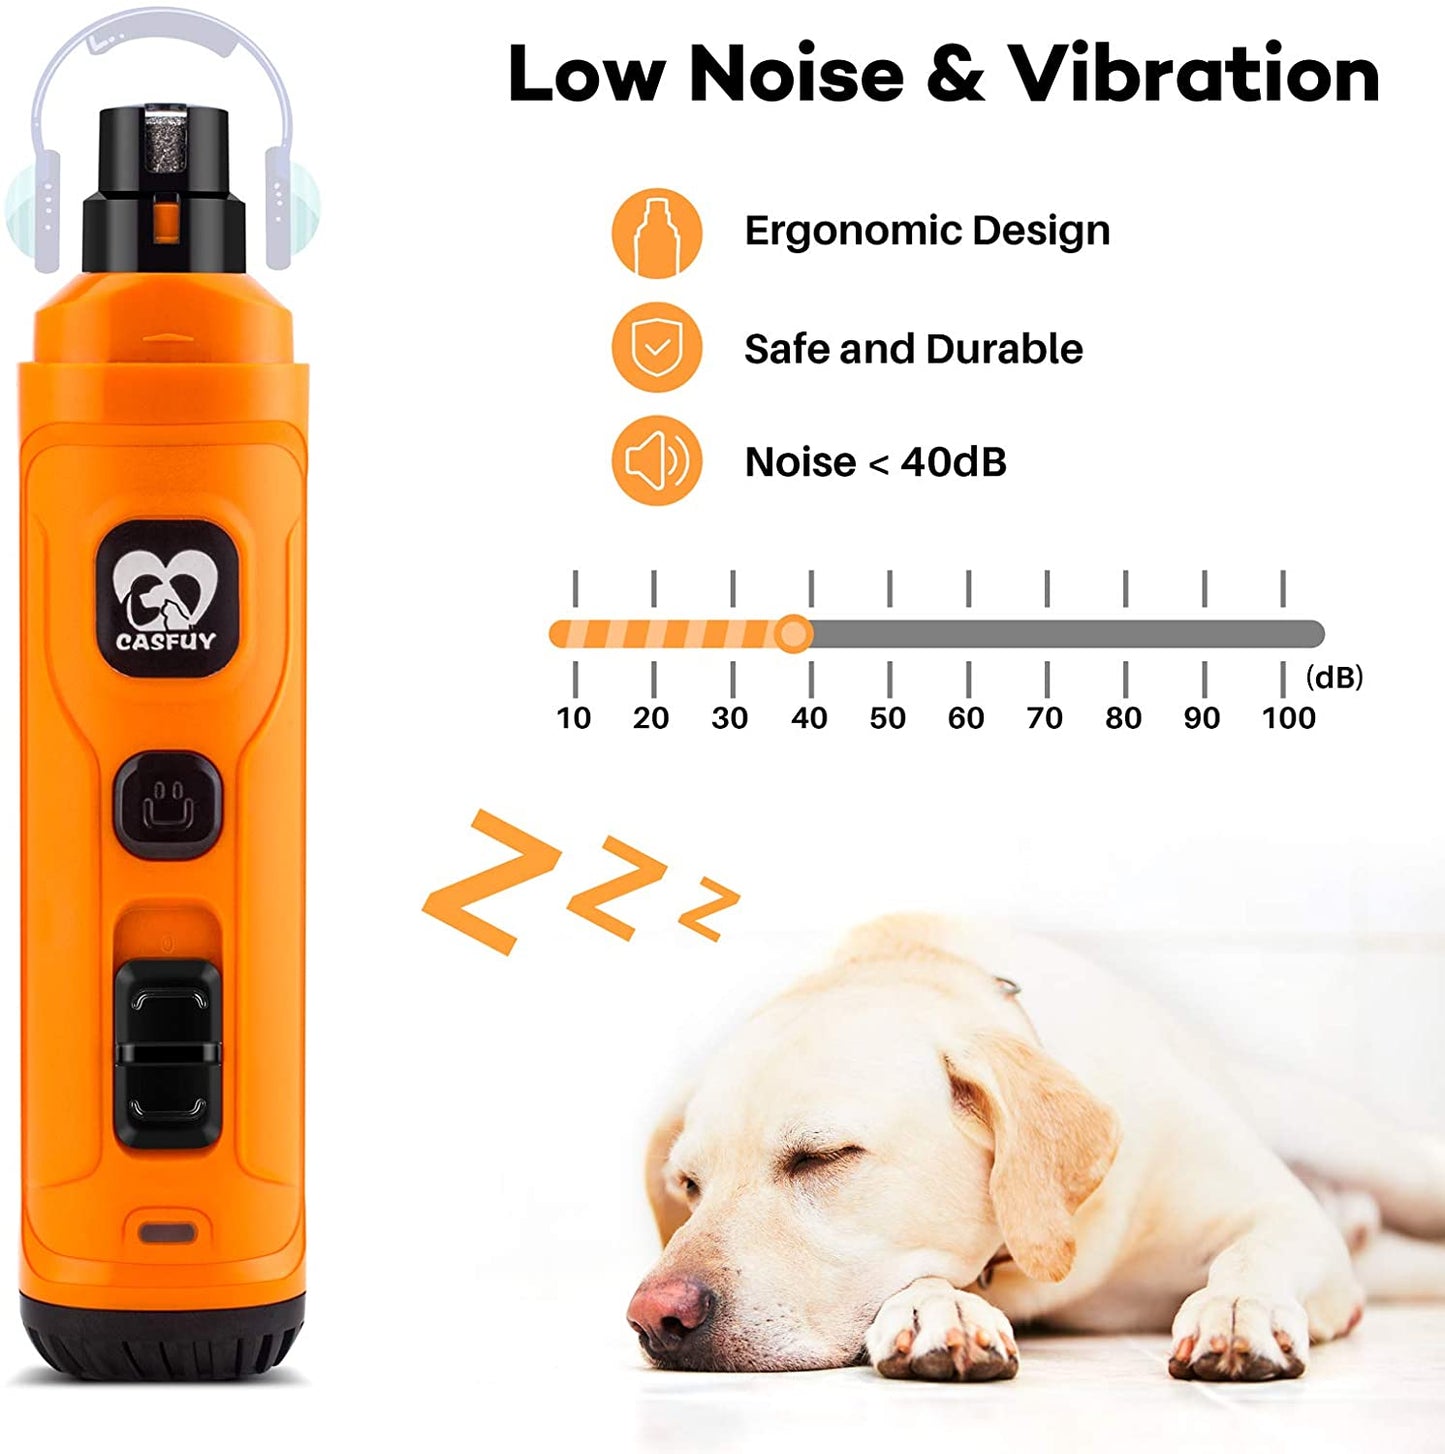 Dog Nail Grinder with 2 LED Light - New Version 2-Speed Powerful Electric Pet Nail Trimmer Professional Quiet Painless Paws Grooming & Smoothing for Small Medium Large Dogs and Cats (Orange)